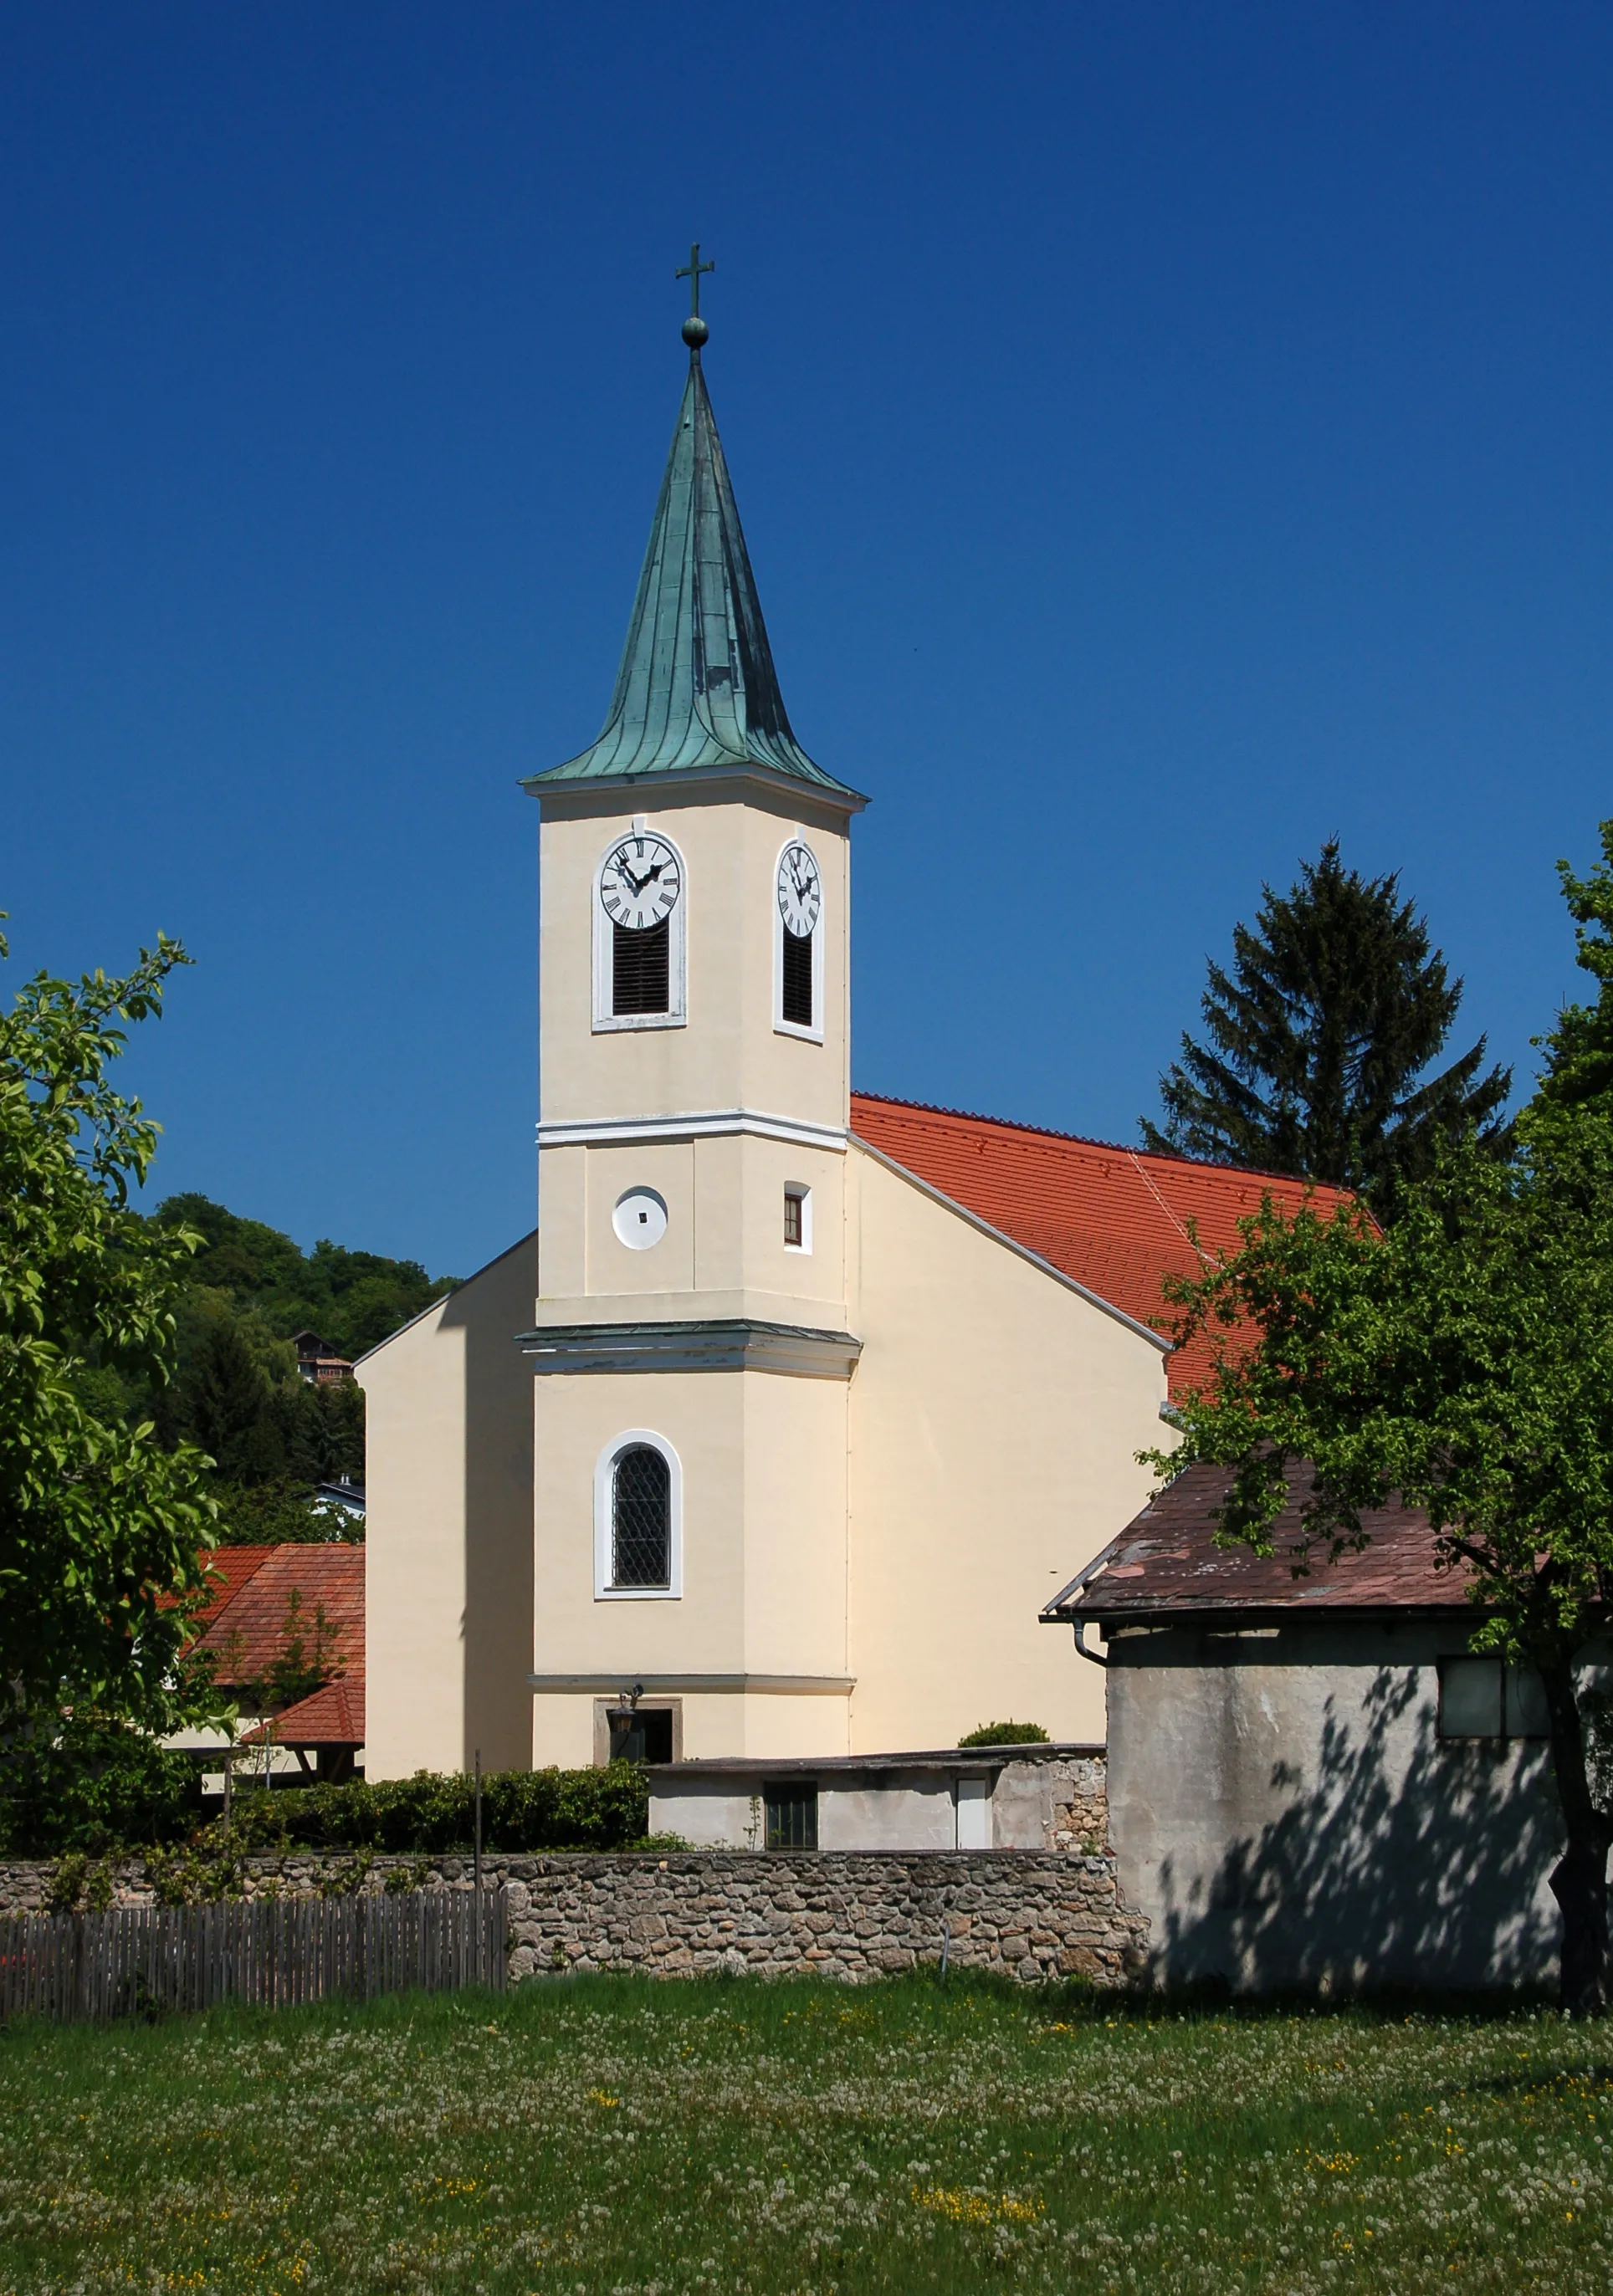 Photo showing: The catholic parish church Saint Laurenz in Hernstein, Lower Austria, is protected as a cultural heritage monument.